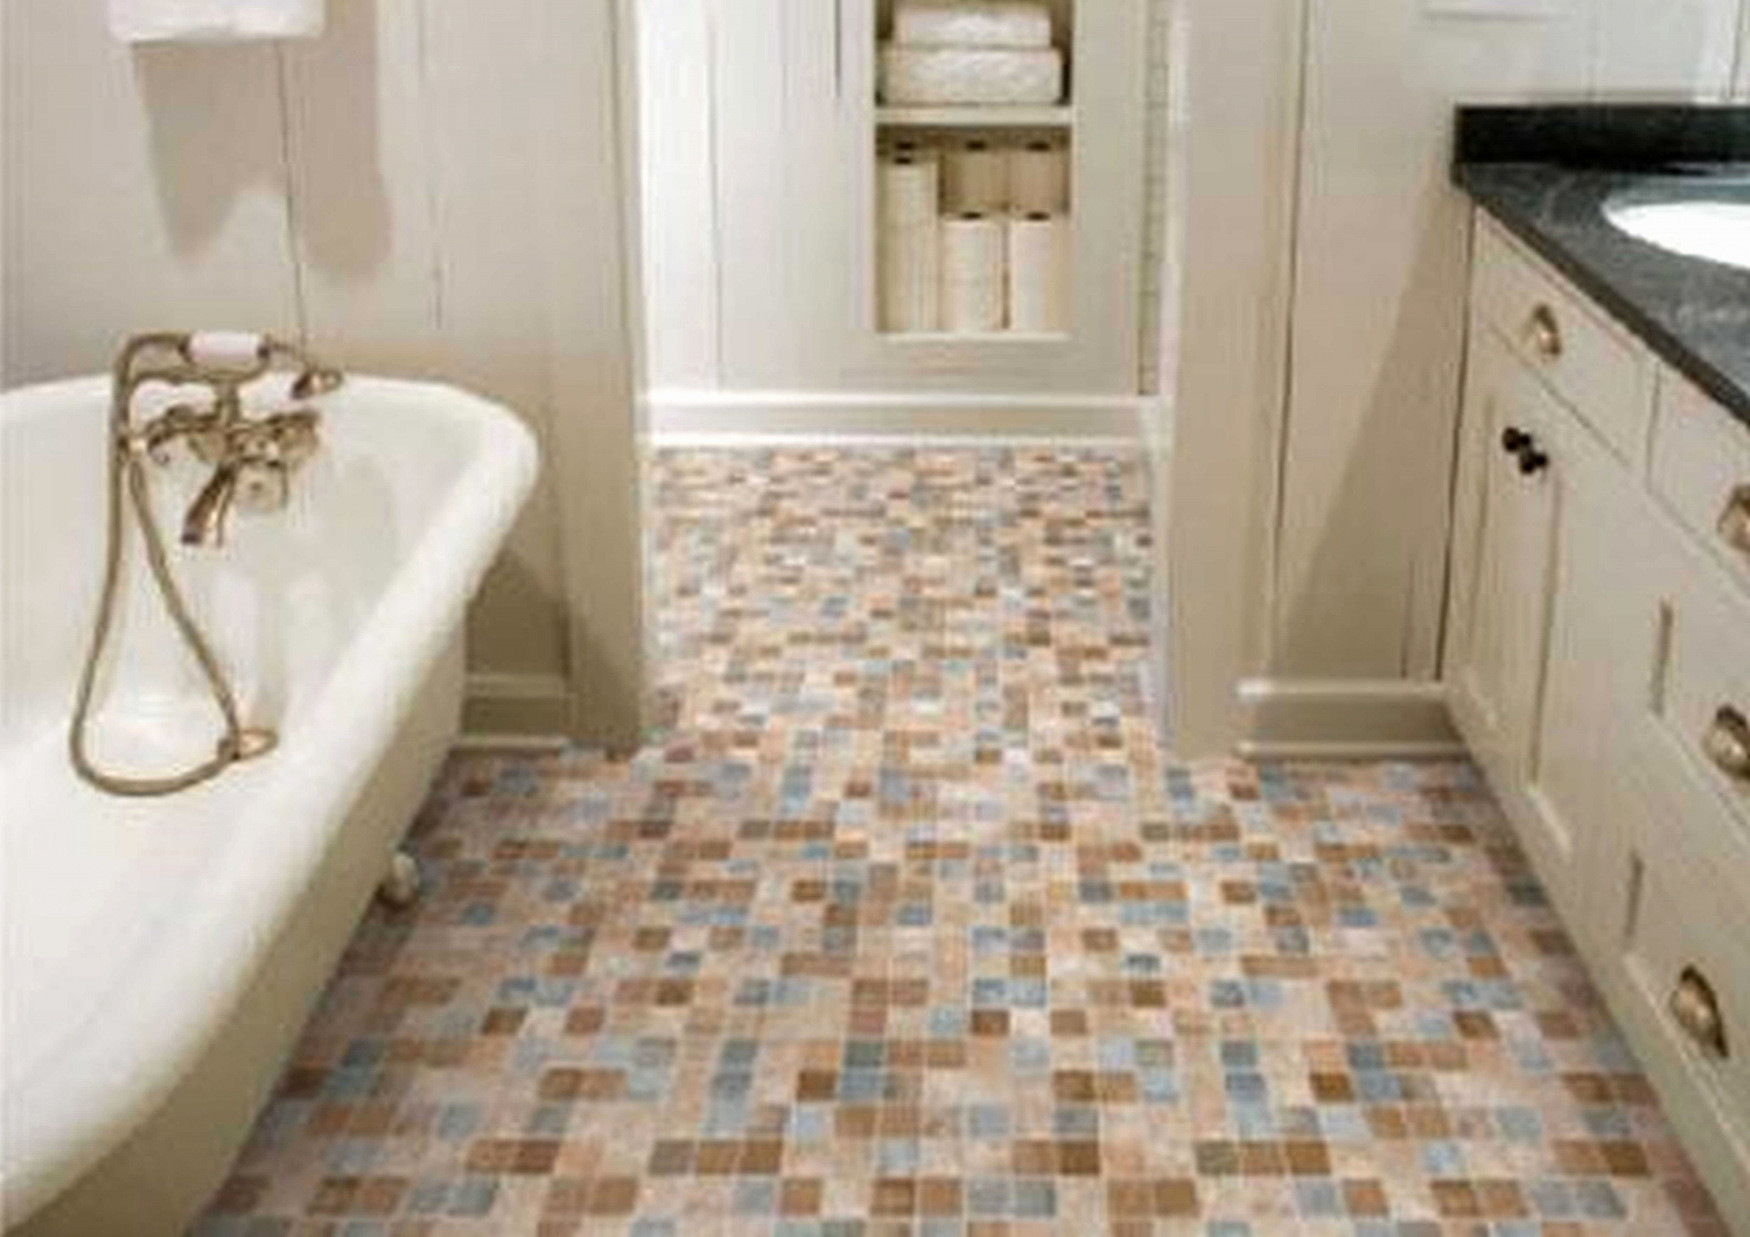 24 Lovely Hardwood Floor with Tile 2024 free download hardwood floor with tile of mosaic bathroom floor tile cute small bathroom floor tile and floor regarding mosaic bathroom floor tile cute small bathroom floor tile and floor tiles mosaic bat